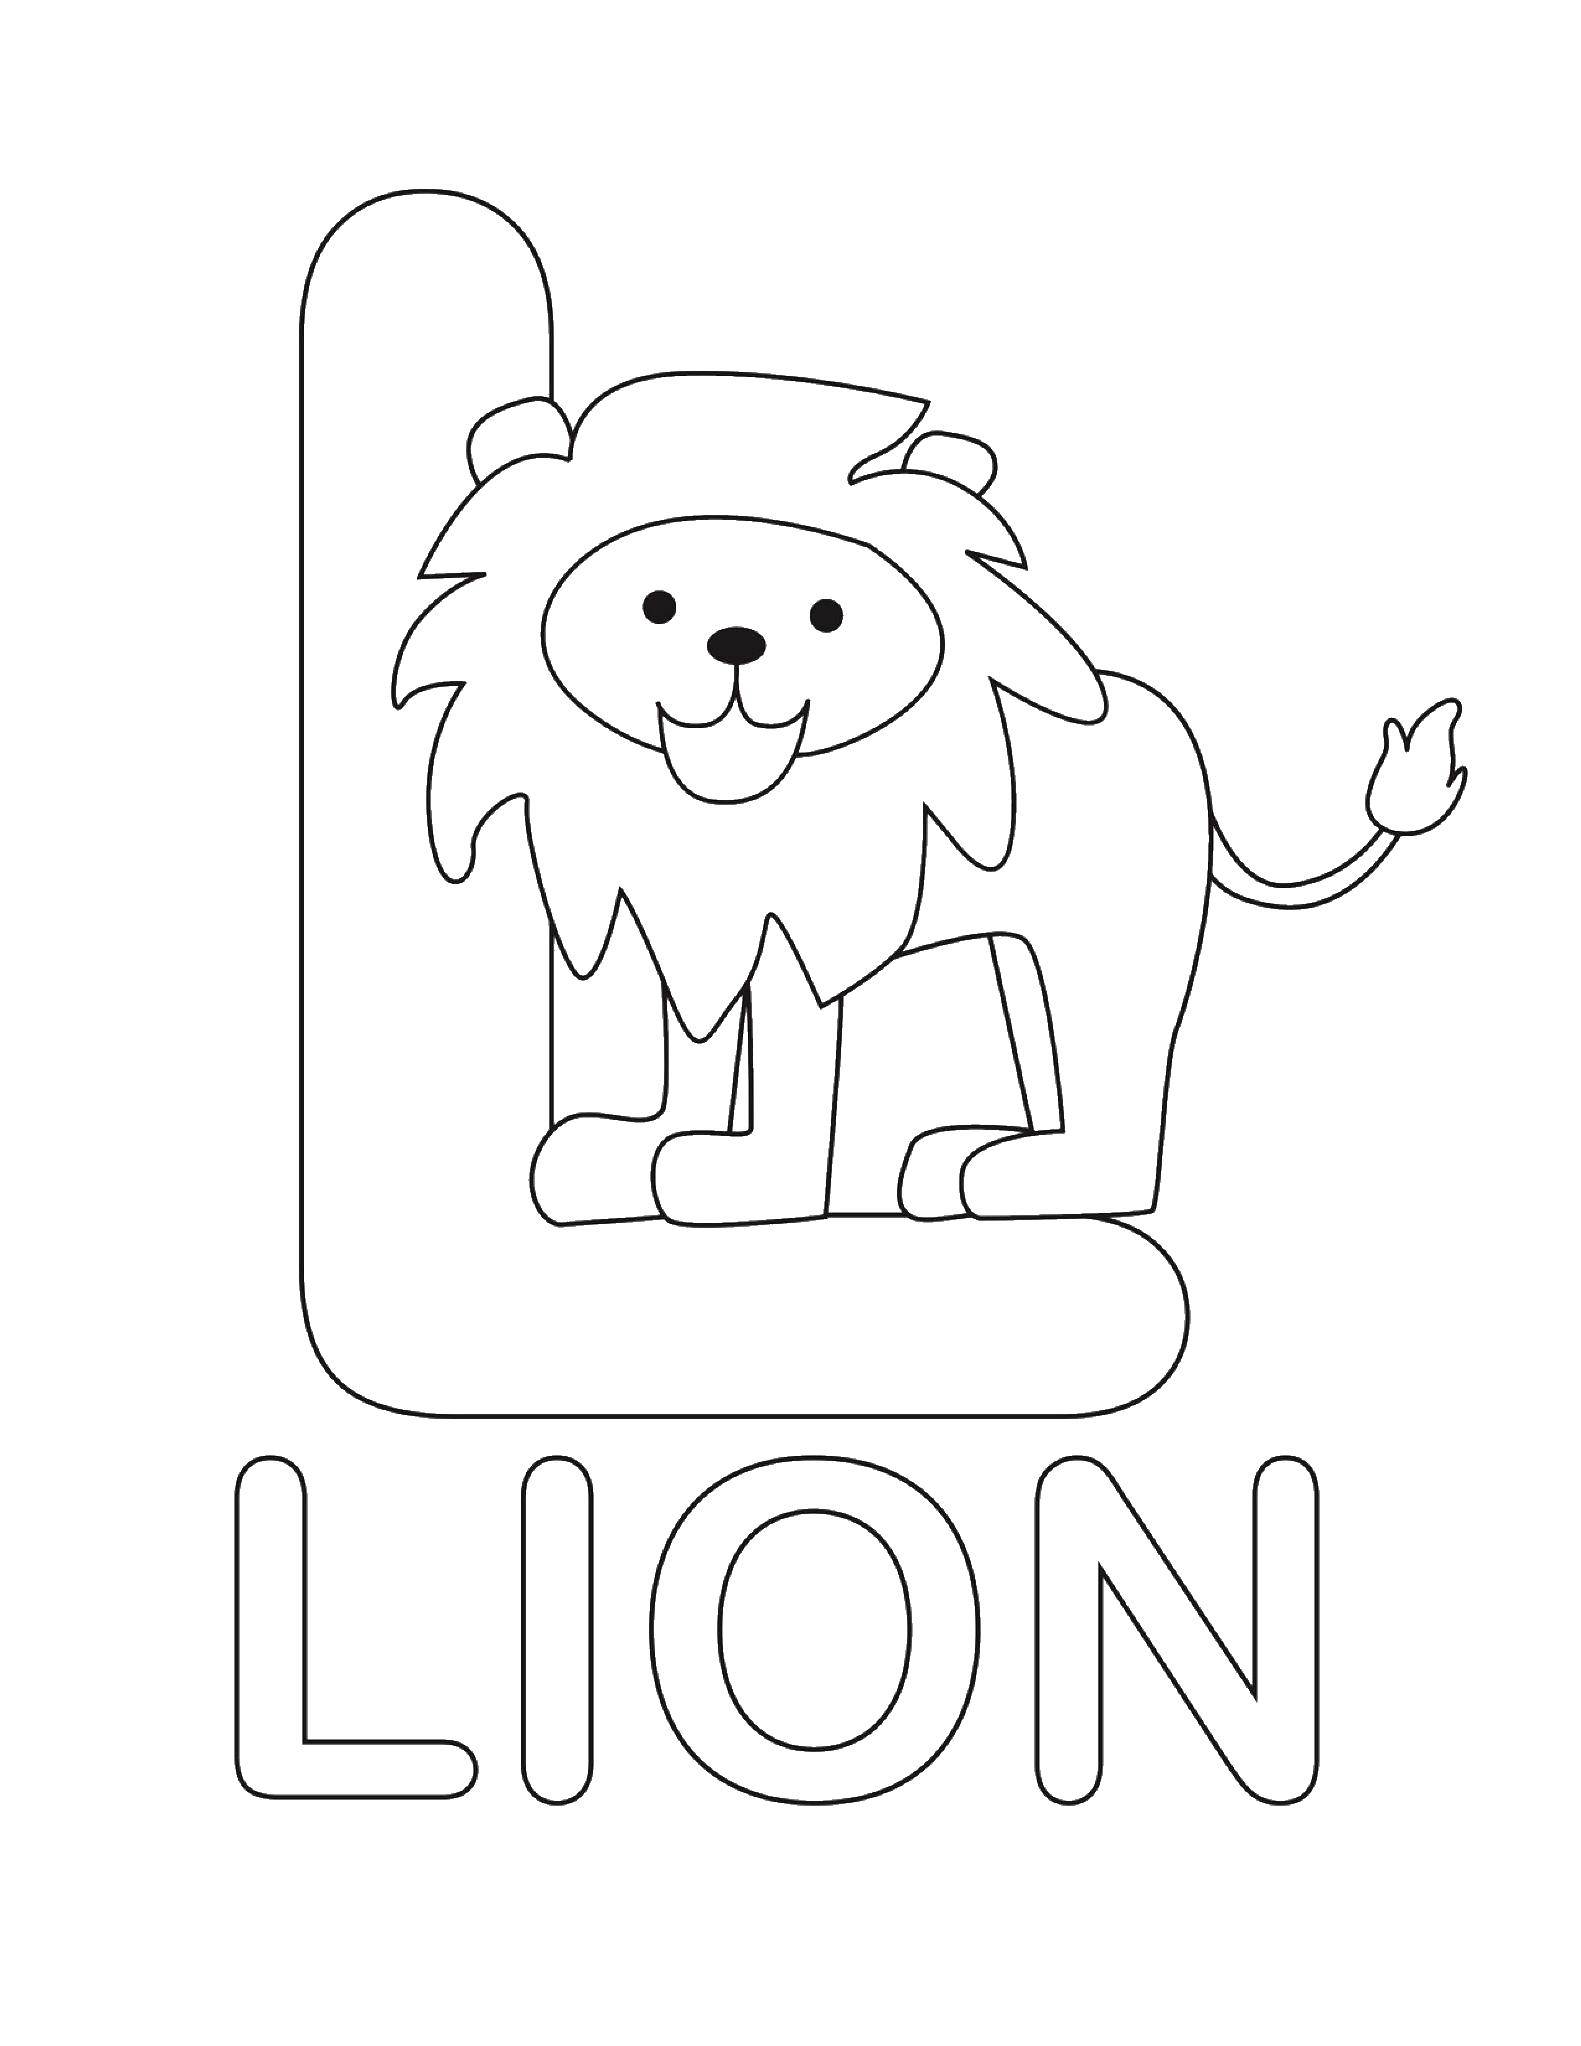 Coloring L Leo. Category English words. Tags:  English.